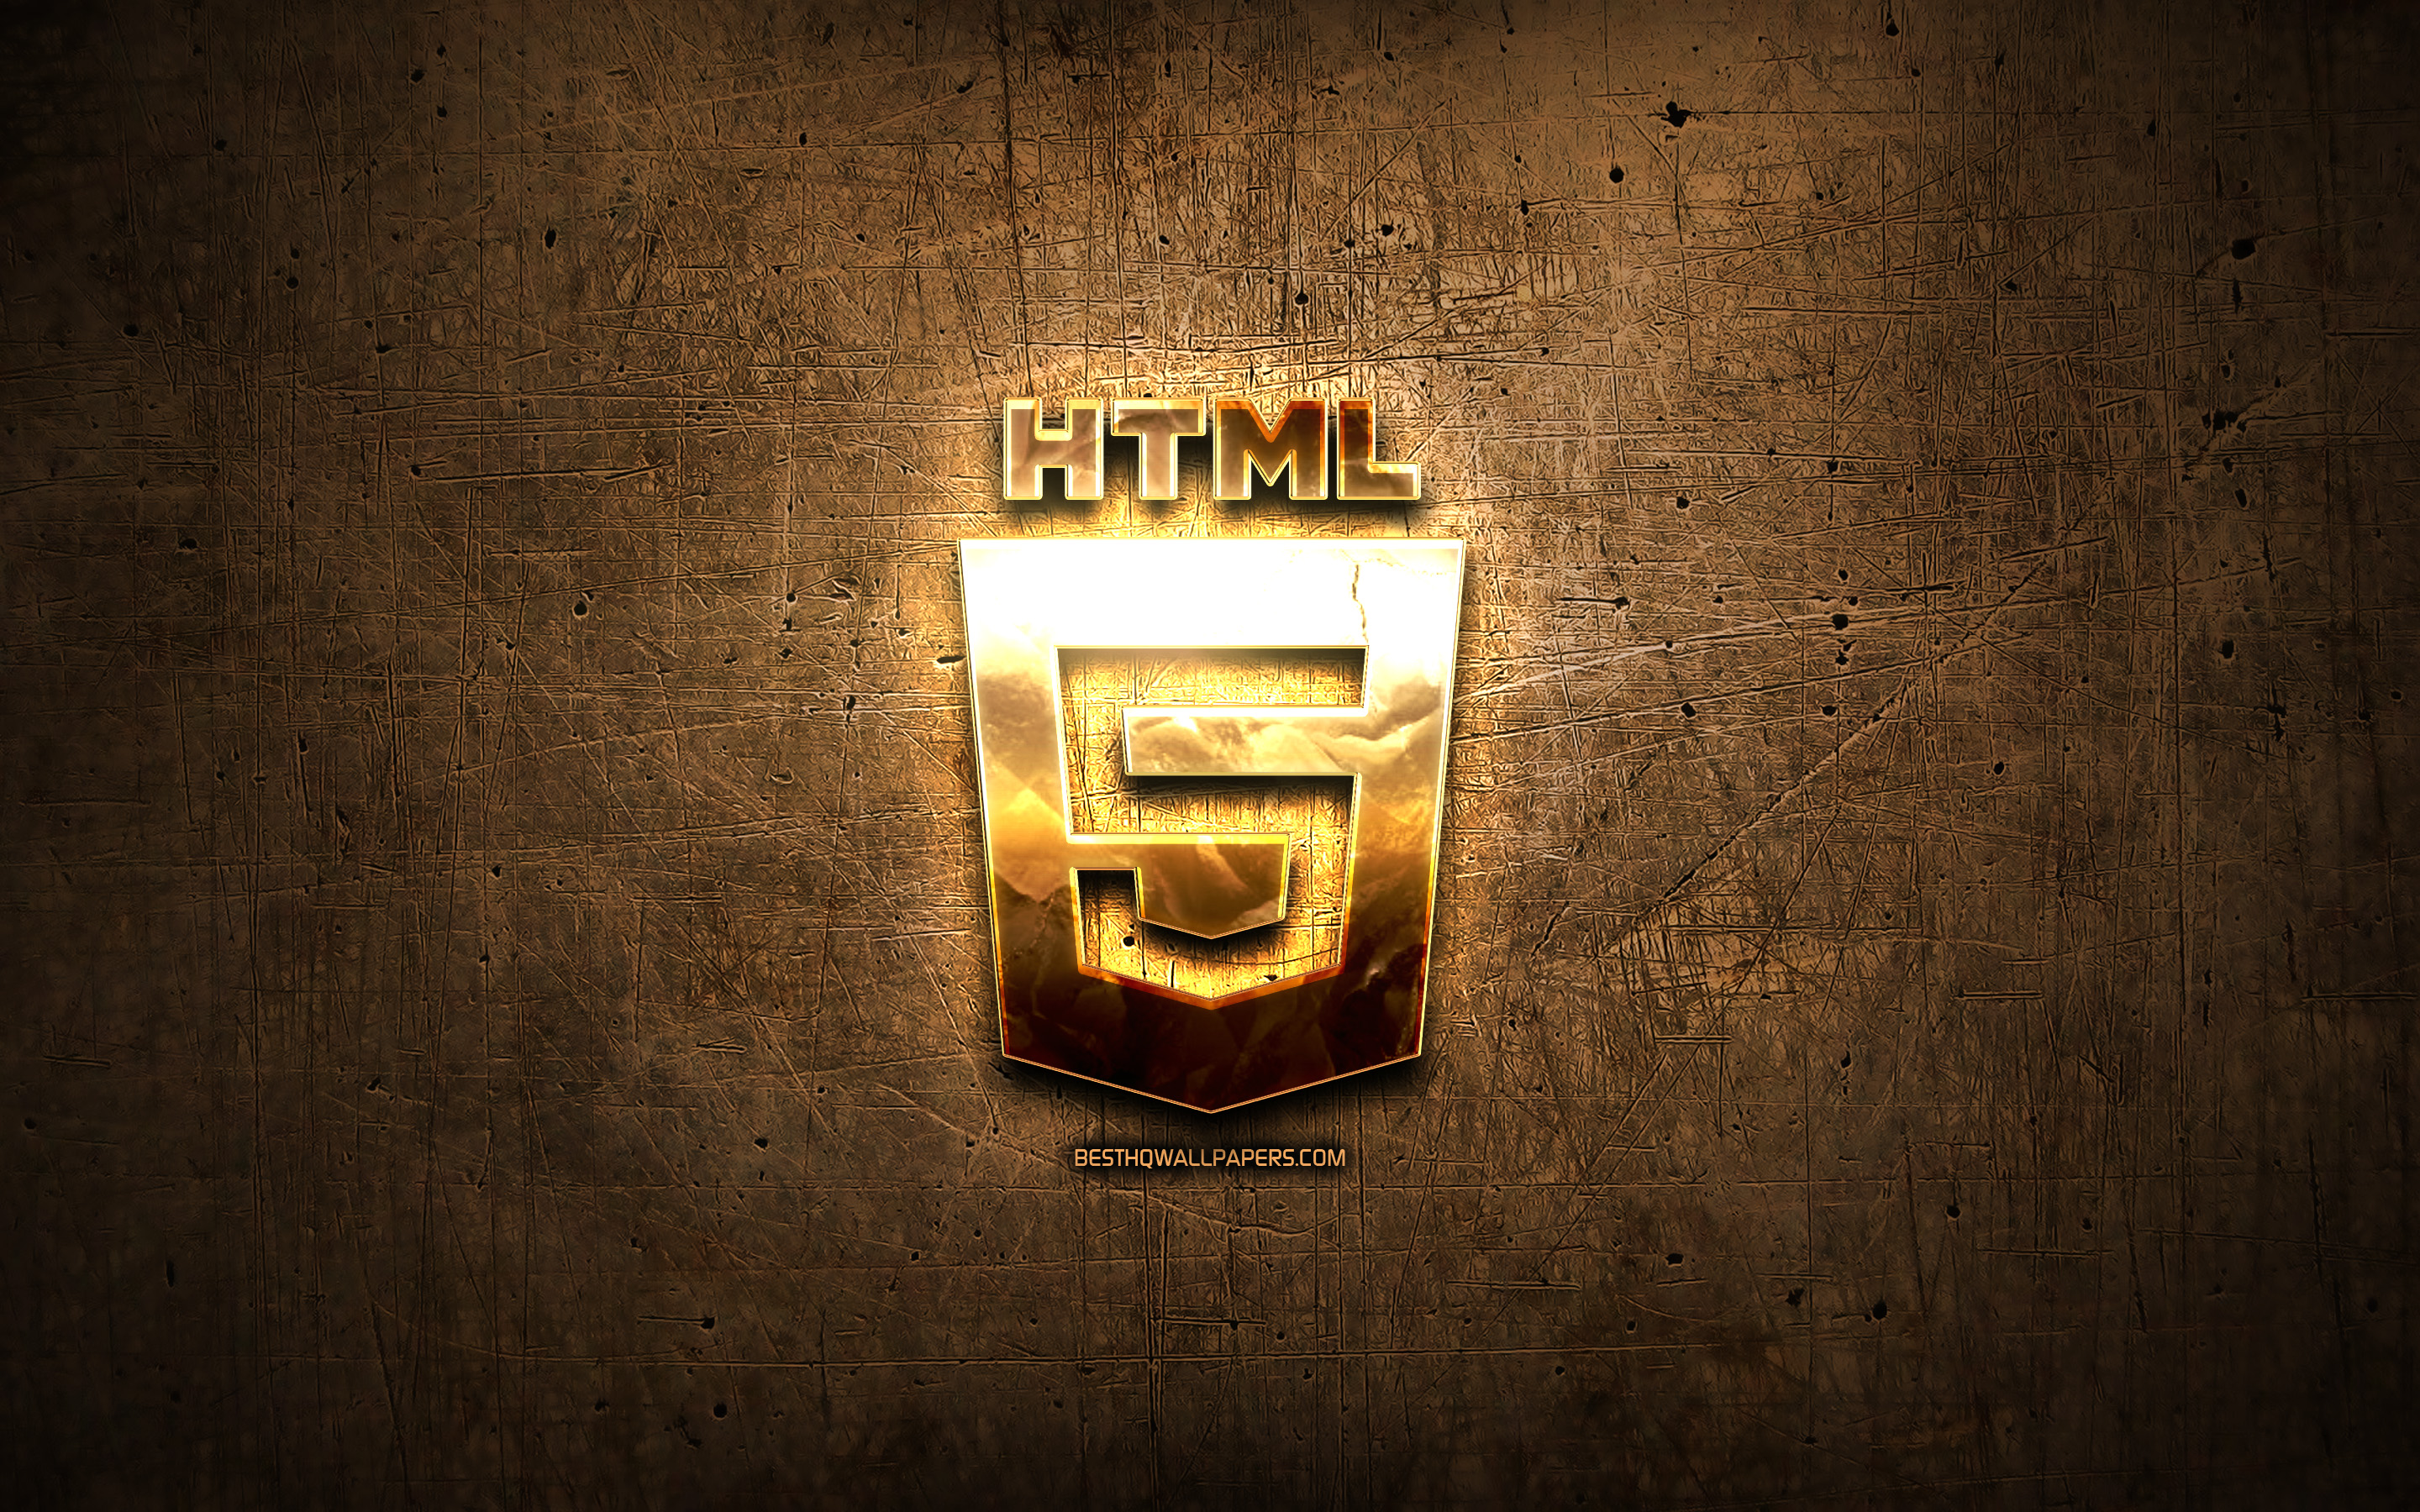 Download wallpaper HTML5 golden logo, programming language, brown metal background, creative, HTML5 logo, programming language signs, HTML5 for desktop with resolution 2880x1800. High Quality HD picture wallpaper